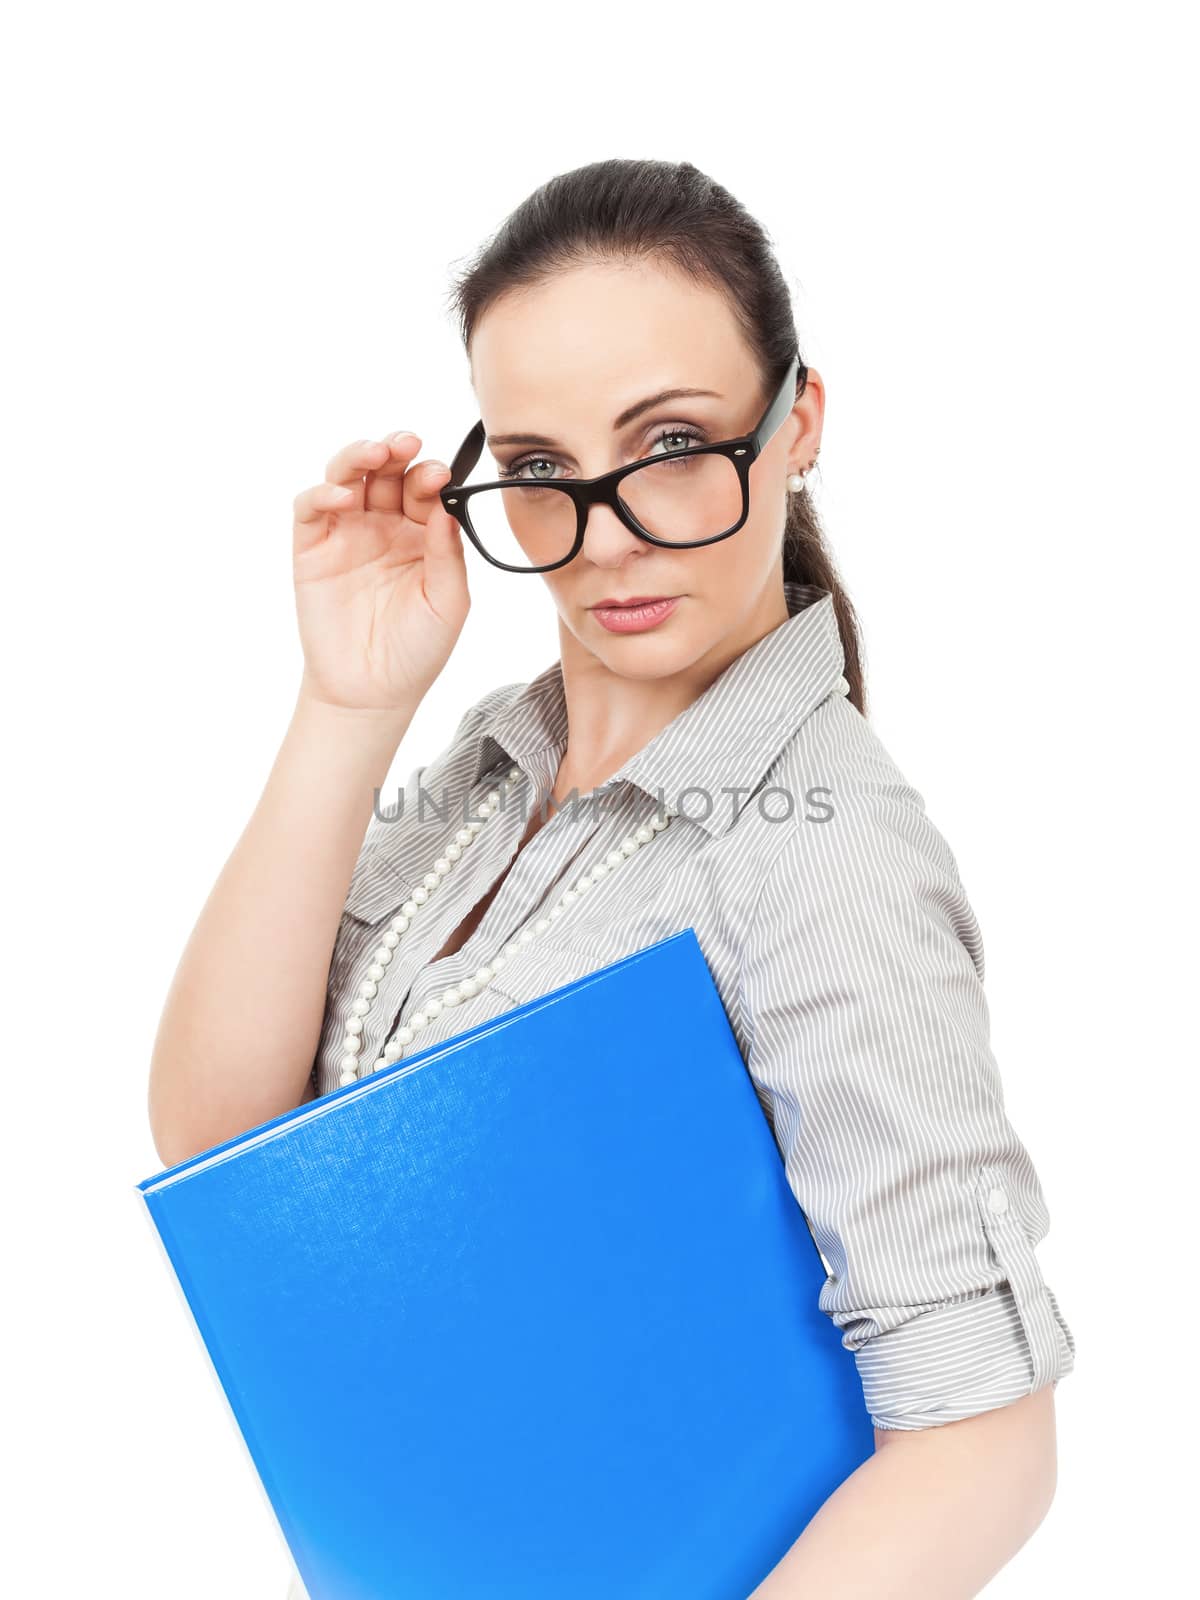 An image of a business woman with glasses